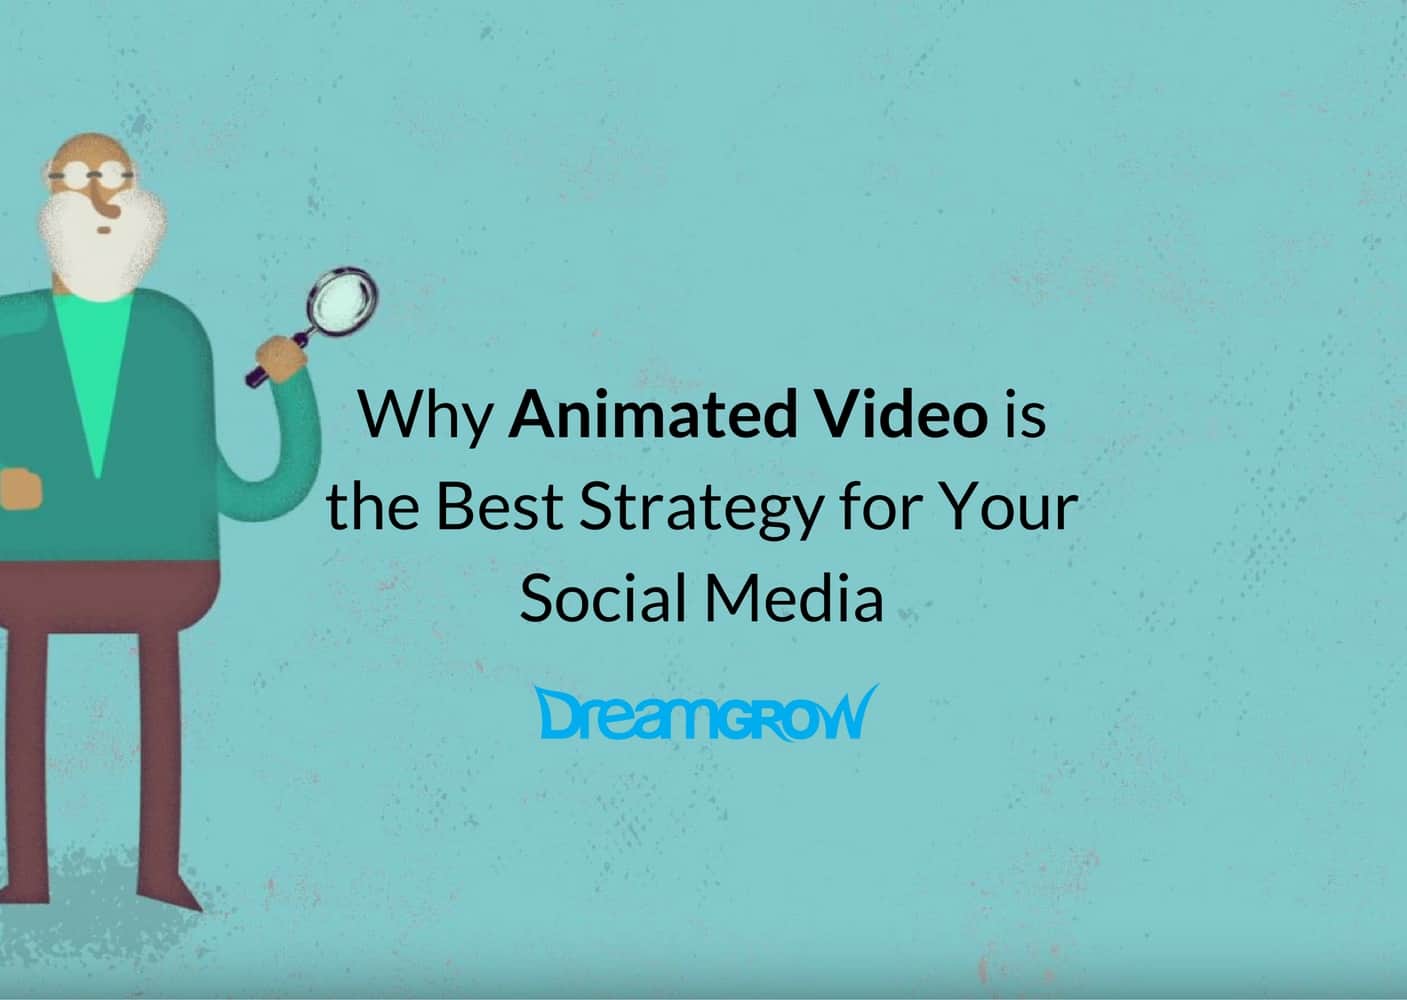 Why Animated Video is the Best Strategy for Your Social Media - Dreamgrow